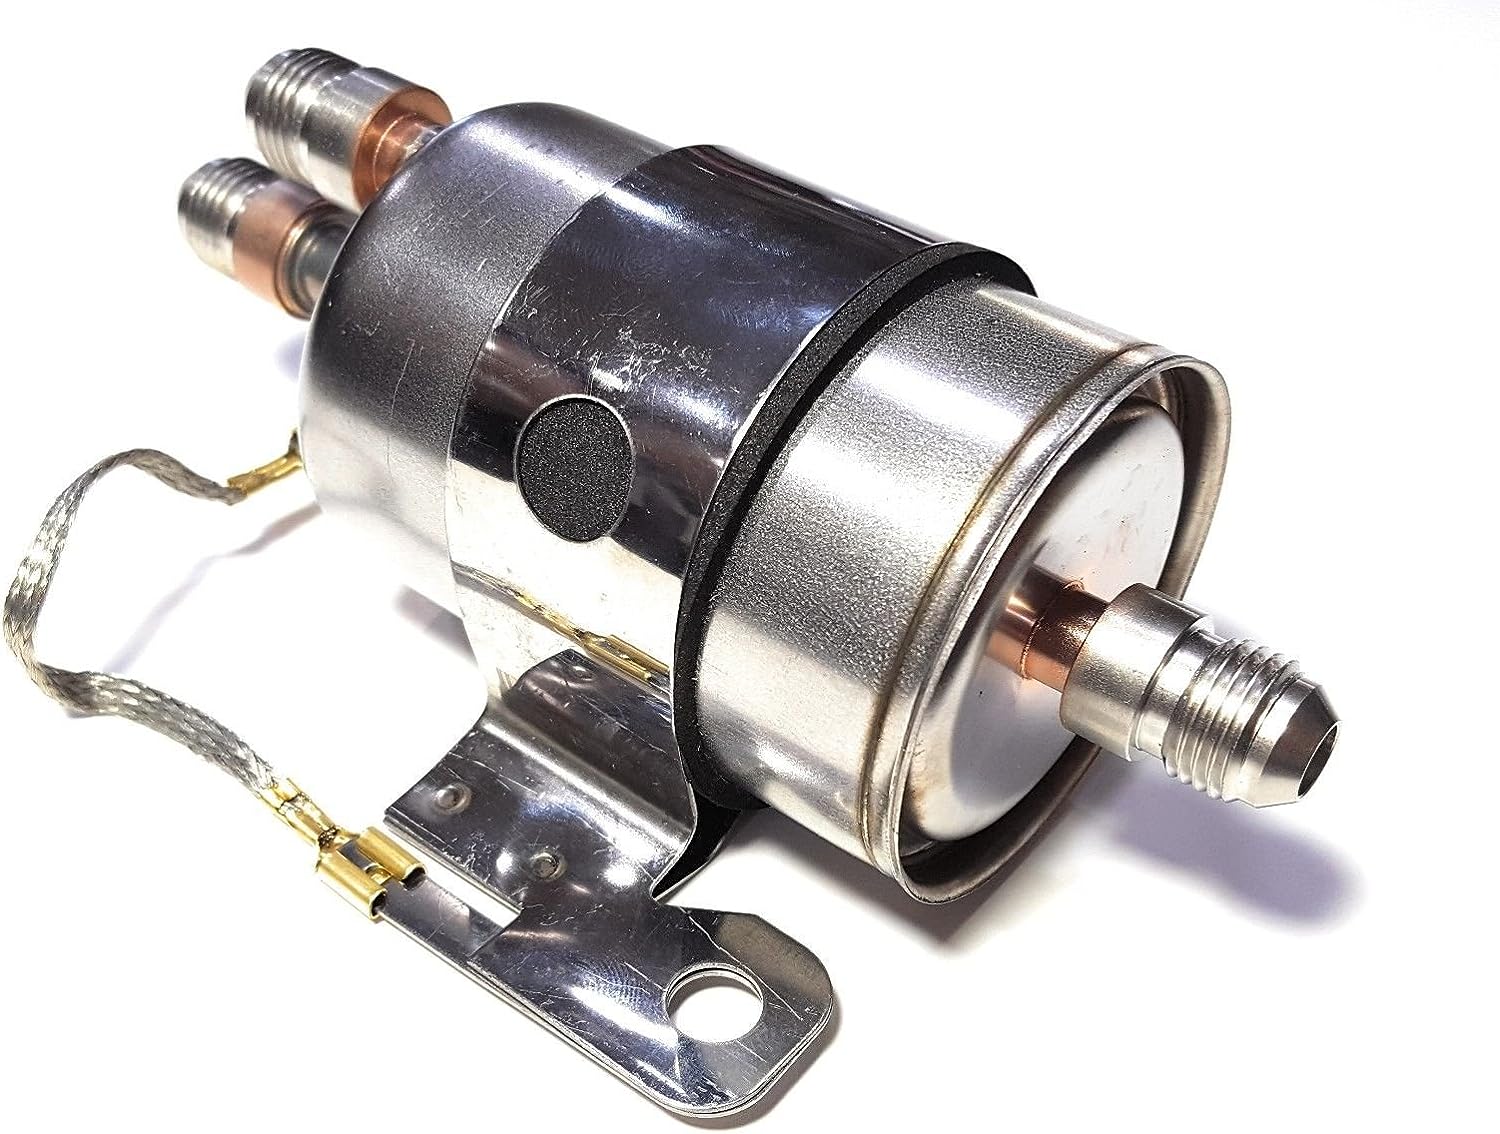 return style fuel regulator & -6AN fuel hose 20' with fittings – Classic  Performance swaps